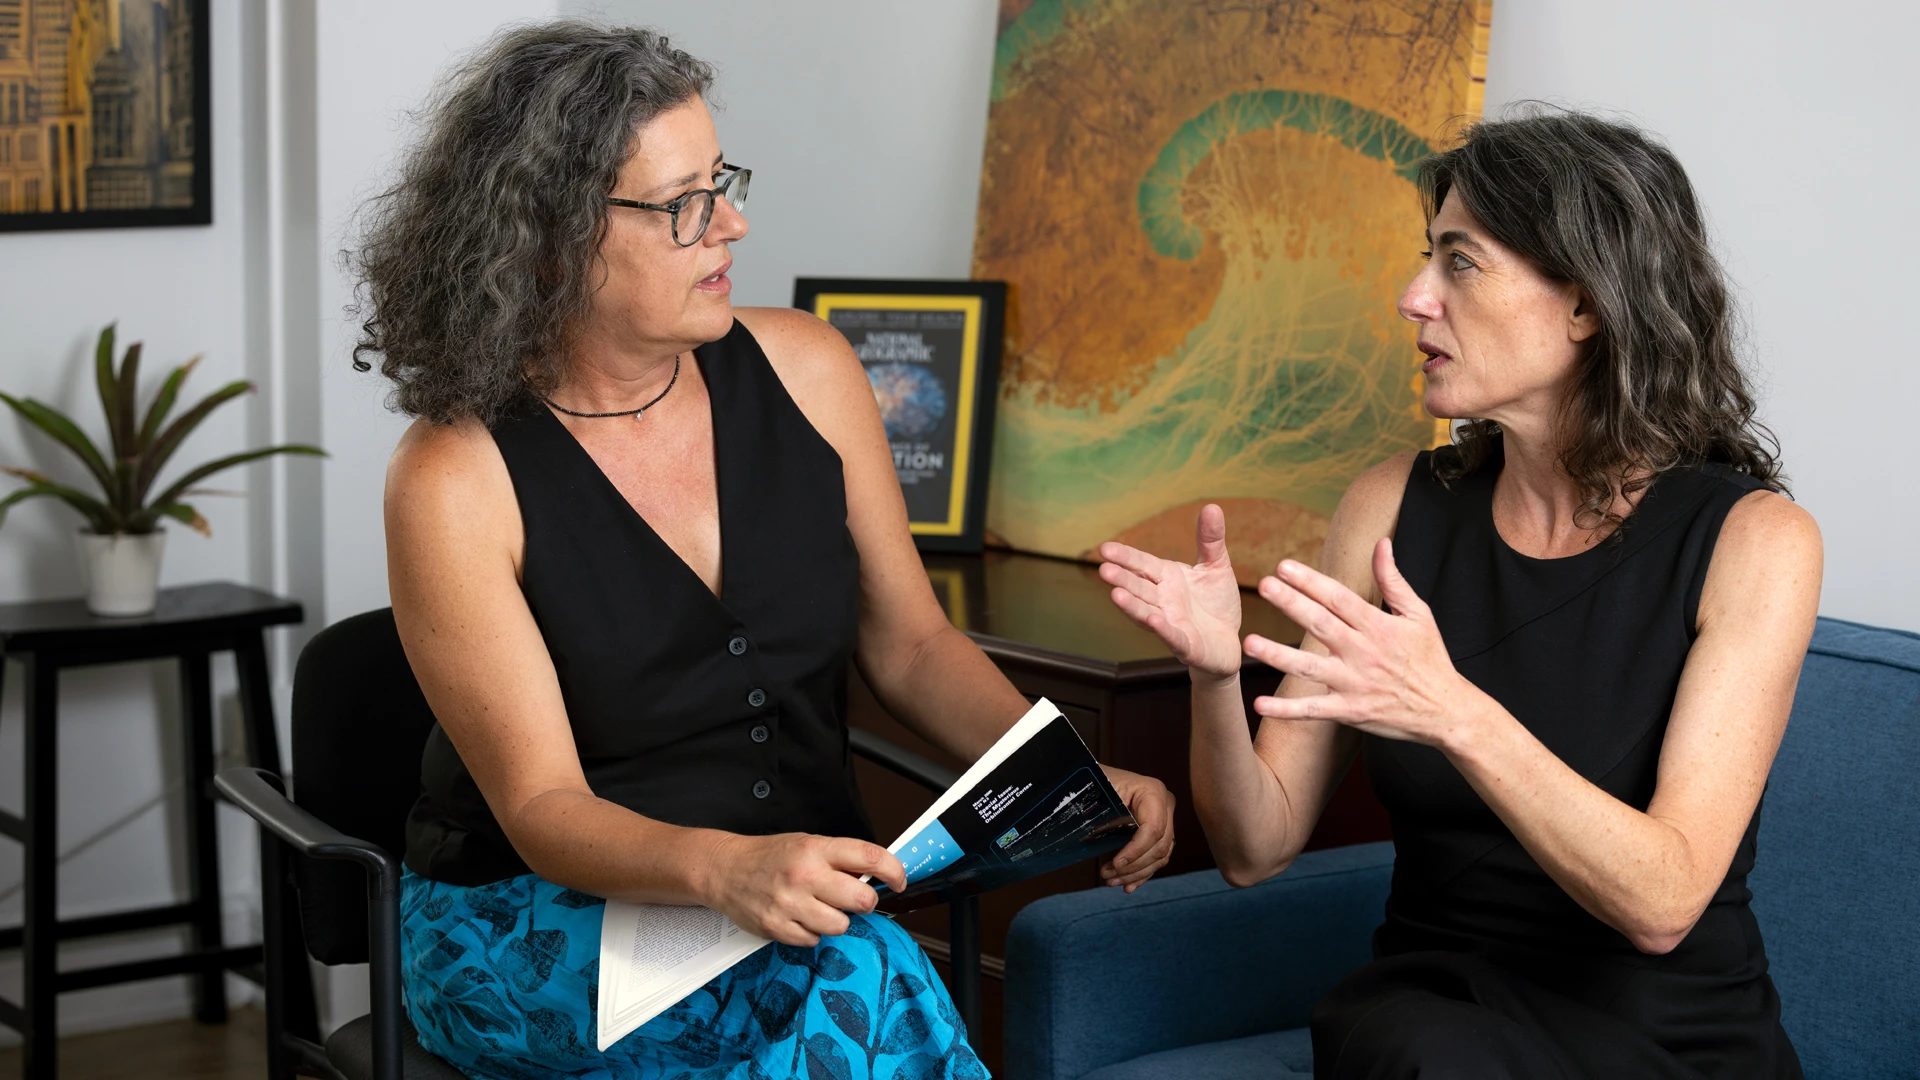 Nelly Alia-Klein, PhD, Associate Professor of Psychiatry, and Neuroscience at Icahn Mount Sinai (left), works closely with Rita Goldstein, PhD, Chief of the Neuropsychoimaging of Addiction and Related Conditions research program (right), to take findings further. This includes exploring additional biomarkers or finding ways to guide interventions for cocaine and heroin addiction.